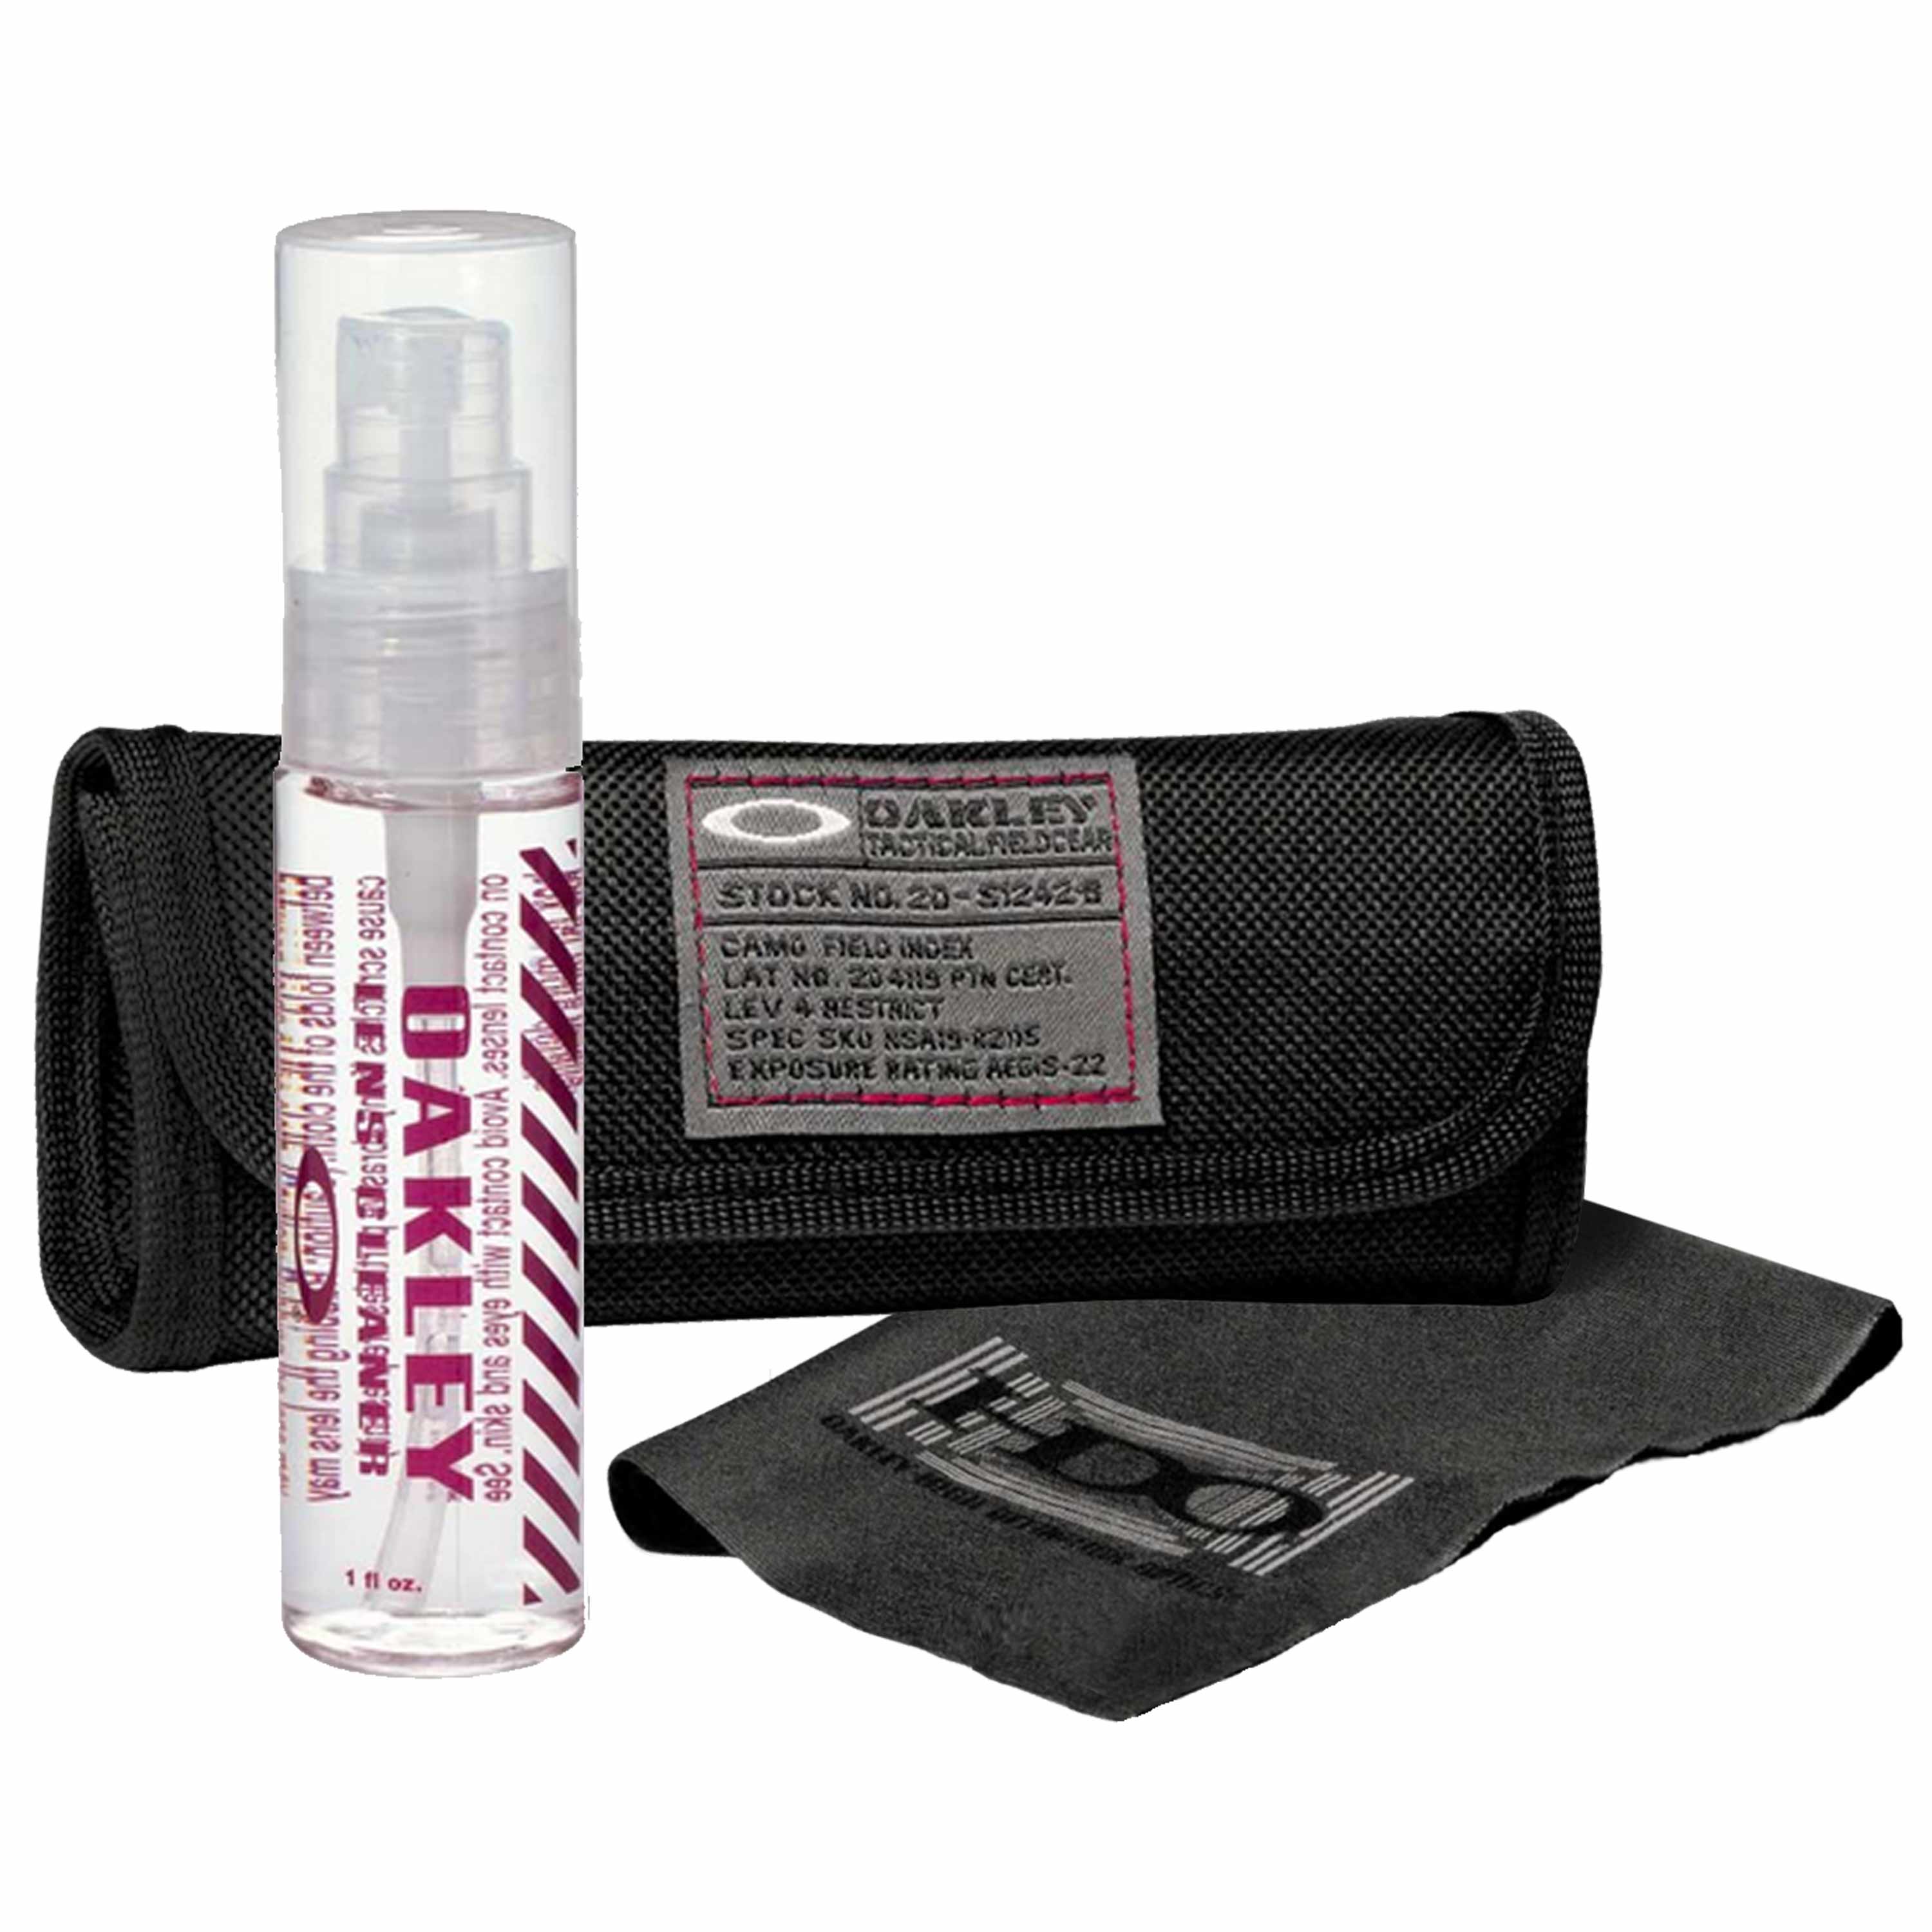 Purchase the Oakley Lens Cleaner Cleaning Kit by ASMC